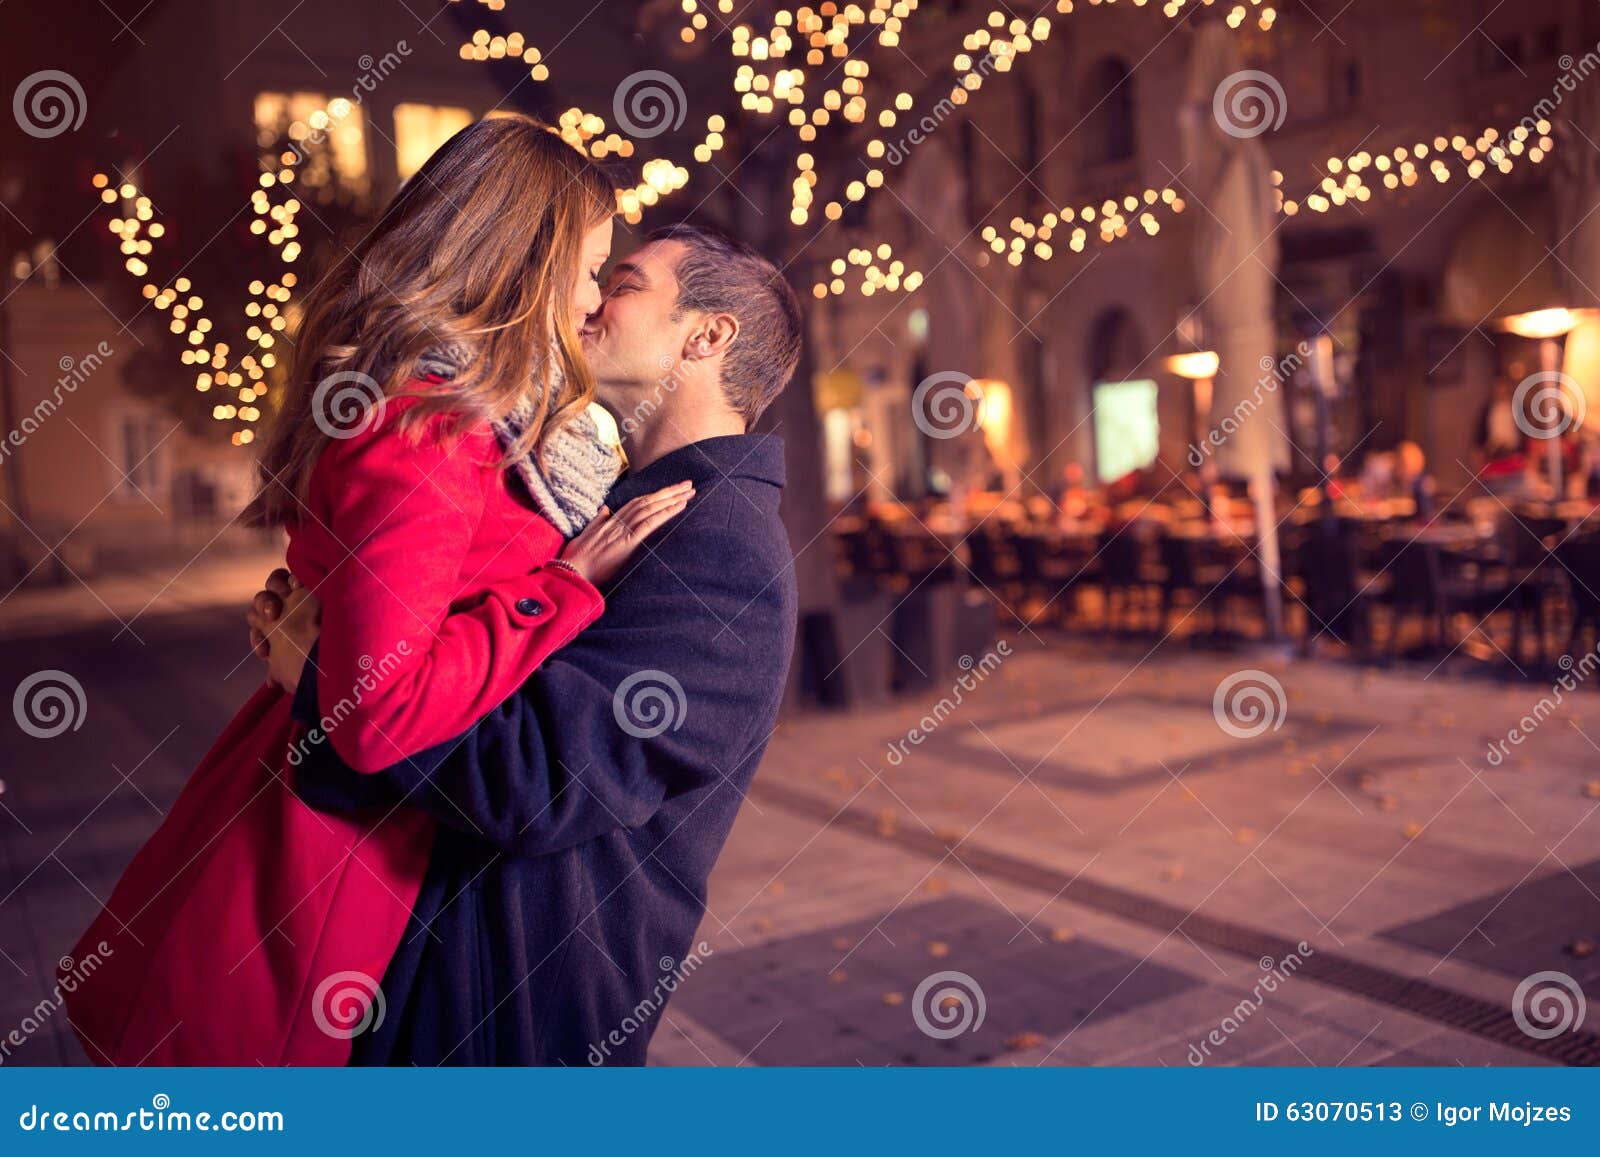 young affectionate couple kissing tenderly